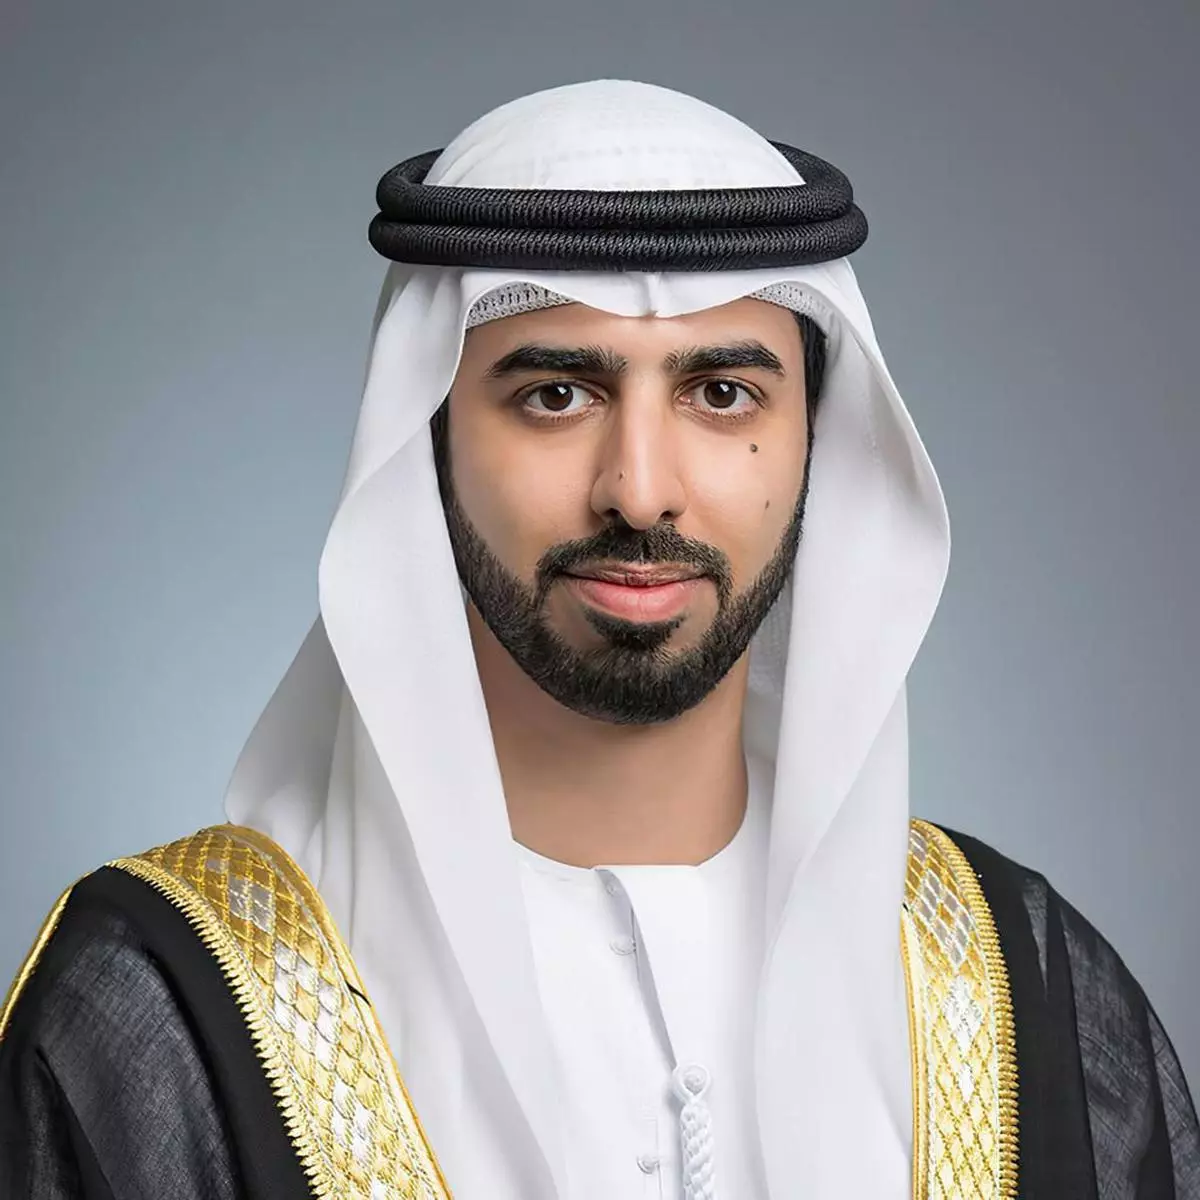 Omar Sultan Al Olama, Minister of State for AI, Digital Economy and Remote Work Applications, Govt of UAE